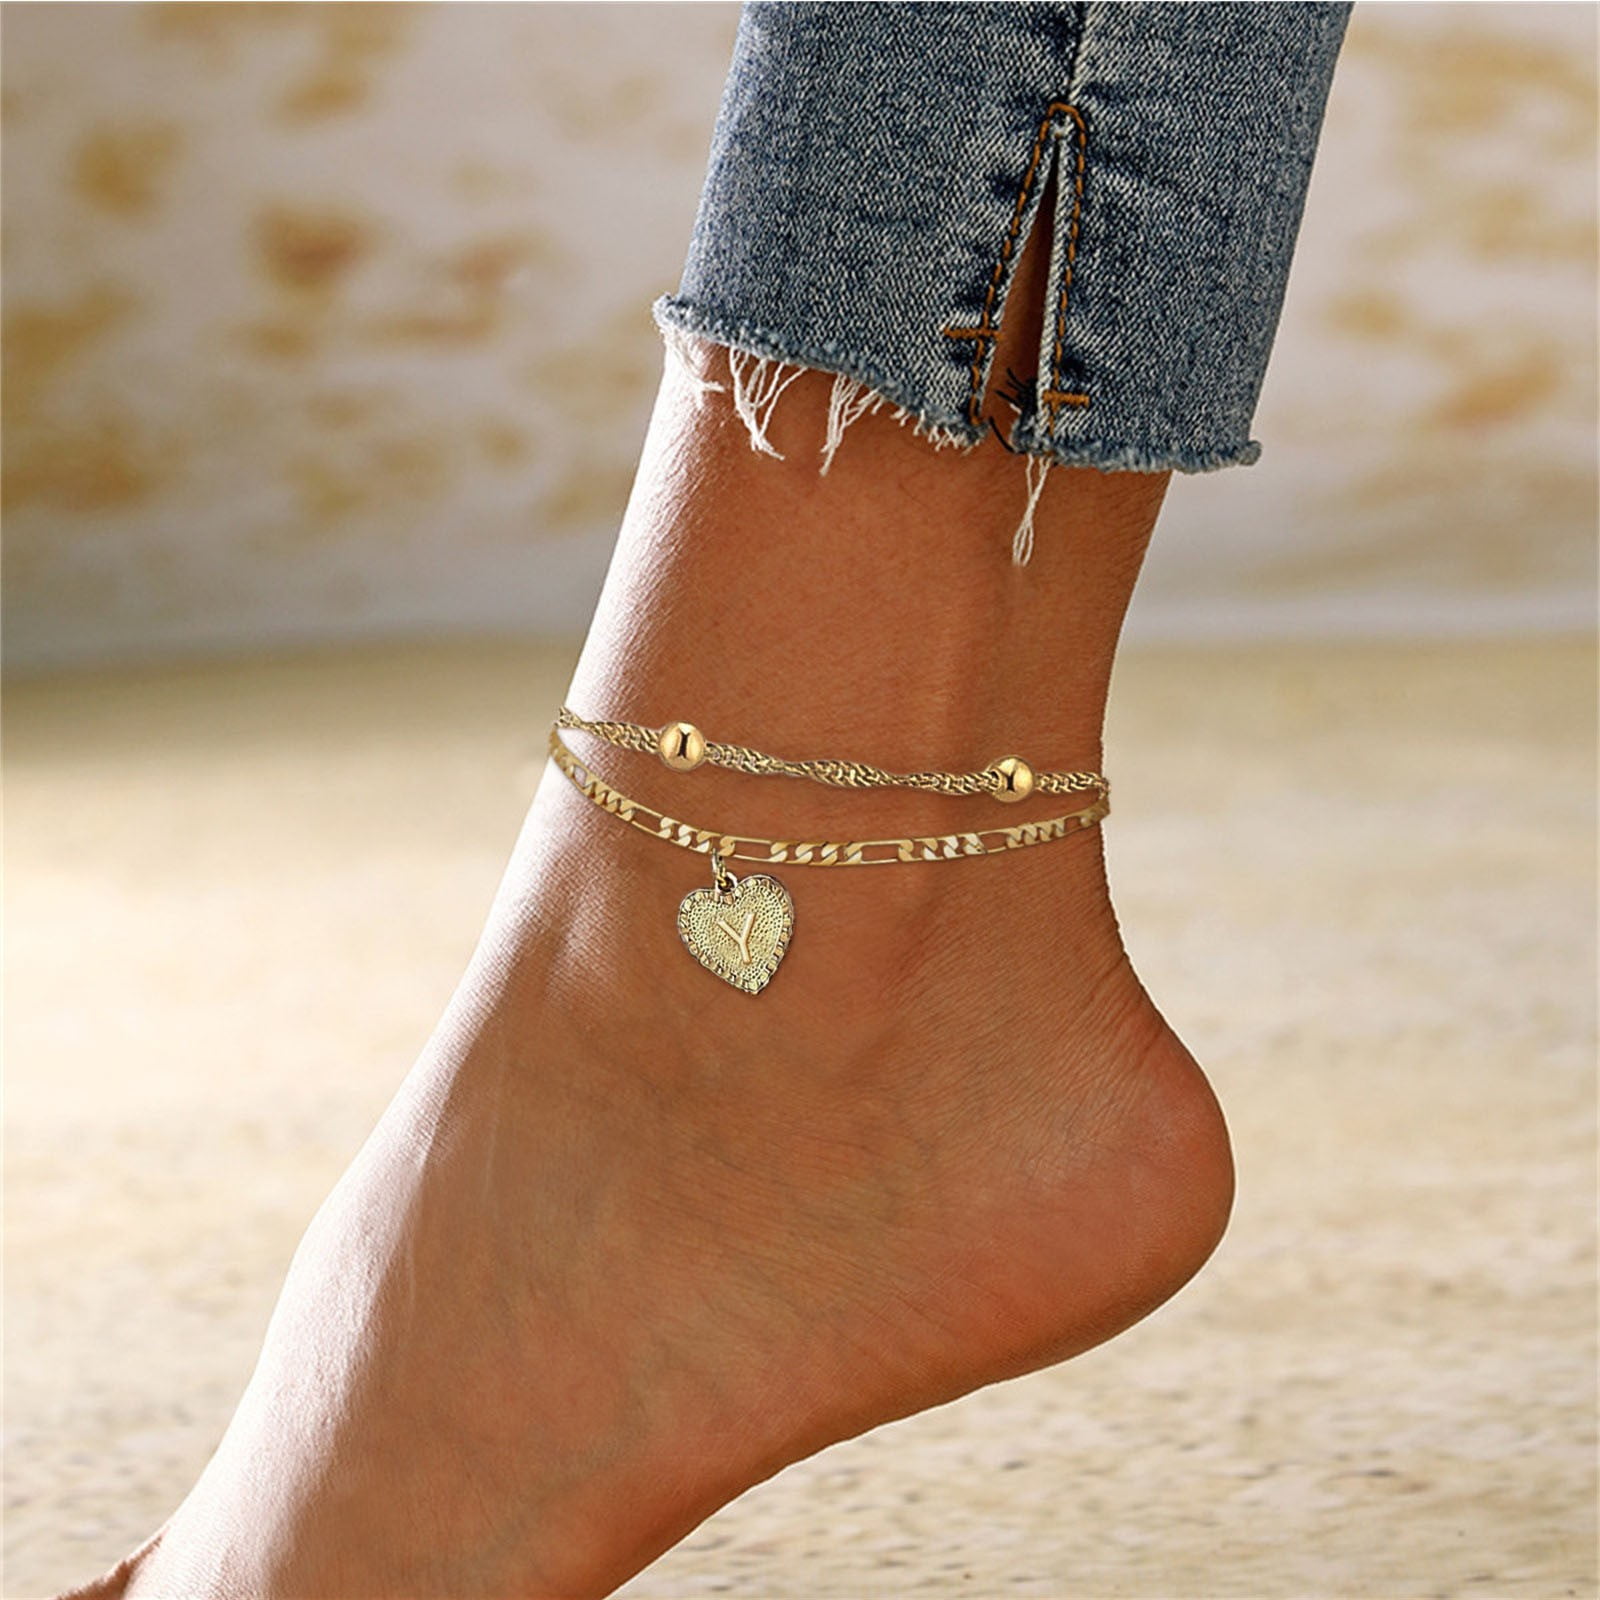 GIVA 925 Sterling Silver Crown Heart Anklet (Single), Adjustable Valentines  Gift for Girlfriend, Gifts for Women & Girls| With Certificate of  Authenticity and 925 Stamp | 6 Month Warranty* : Amazon.in: Fashion